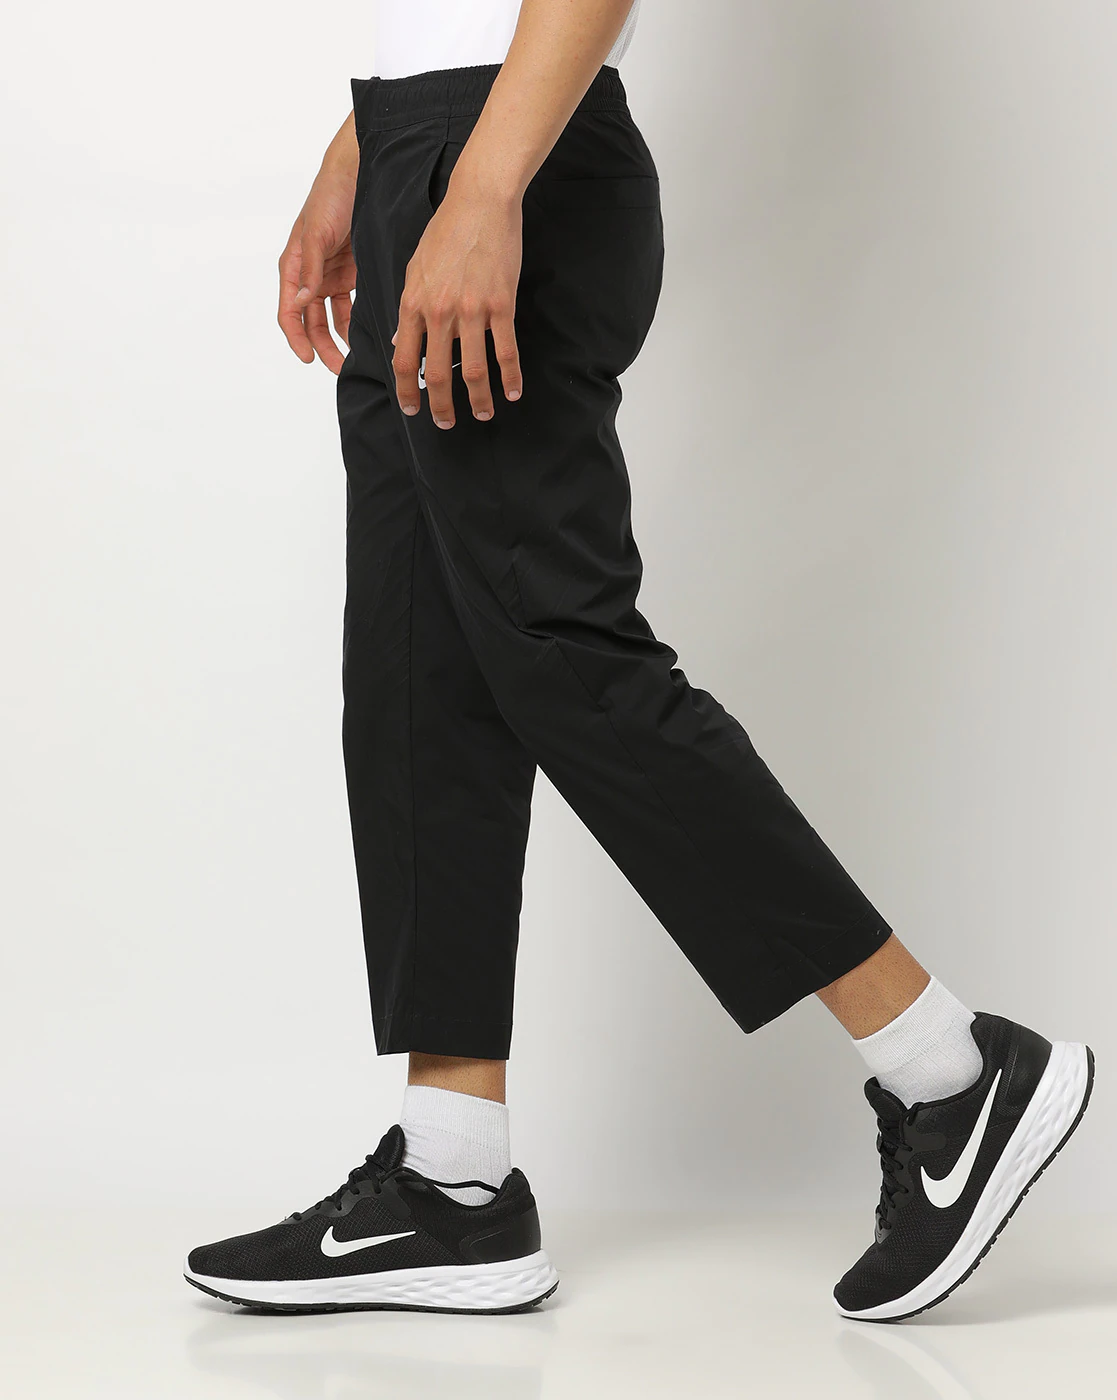 Brand Embroidered Ankle-Length Track Pants-Dm6824-010